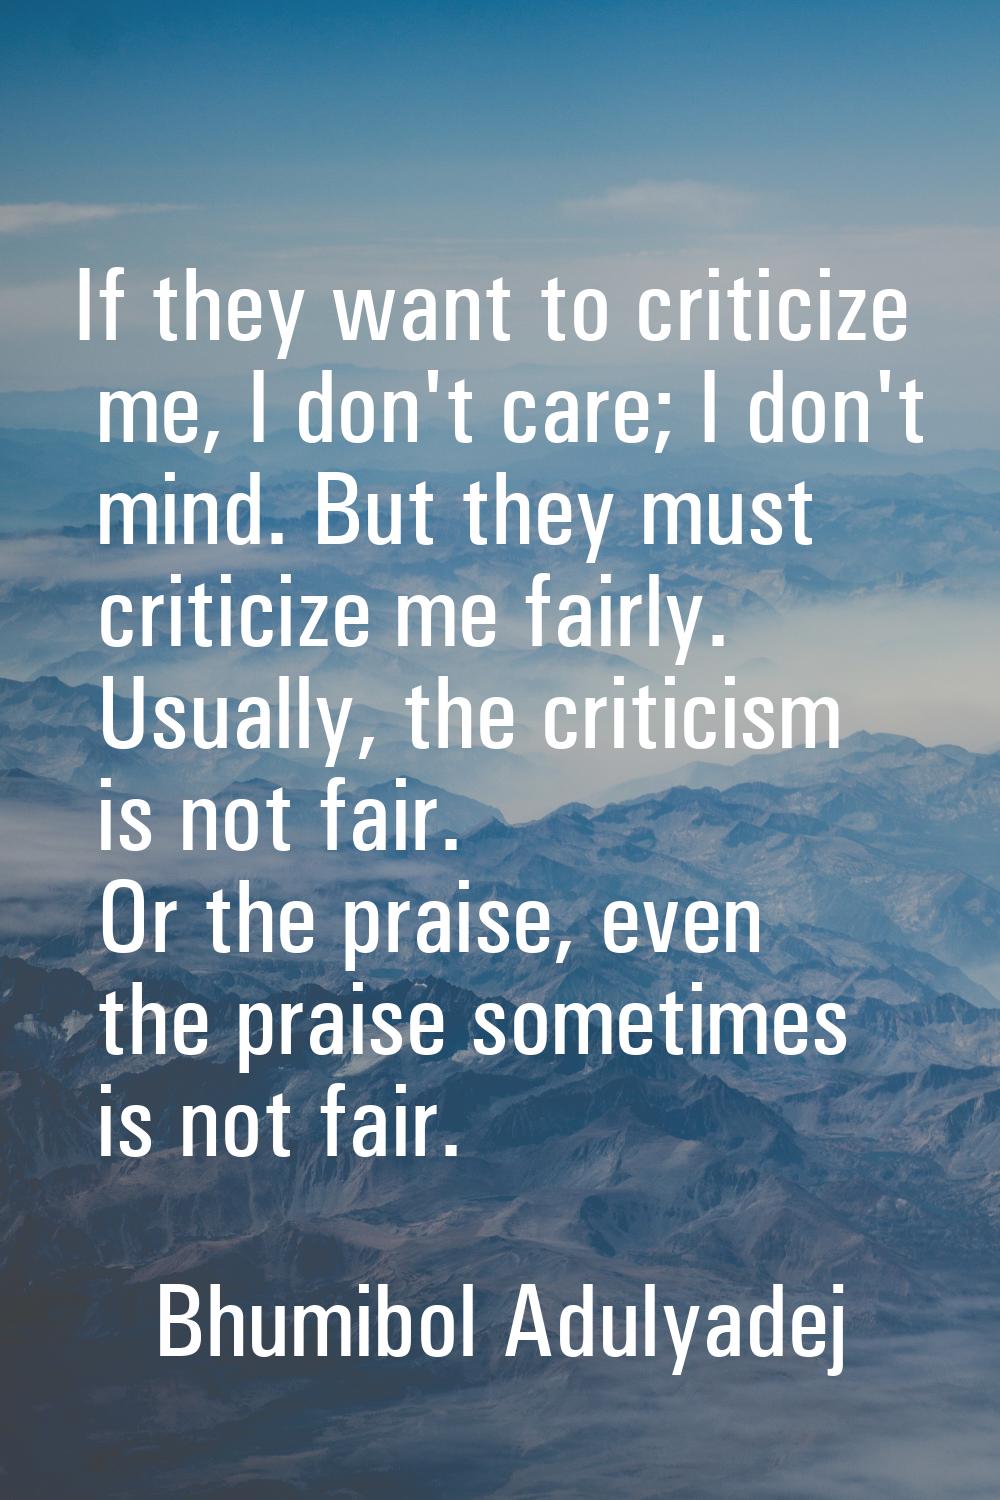 If they want to criticize me, I don't care; I don't mind. But they must criticize me fairly. Usuall